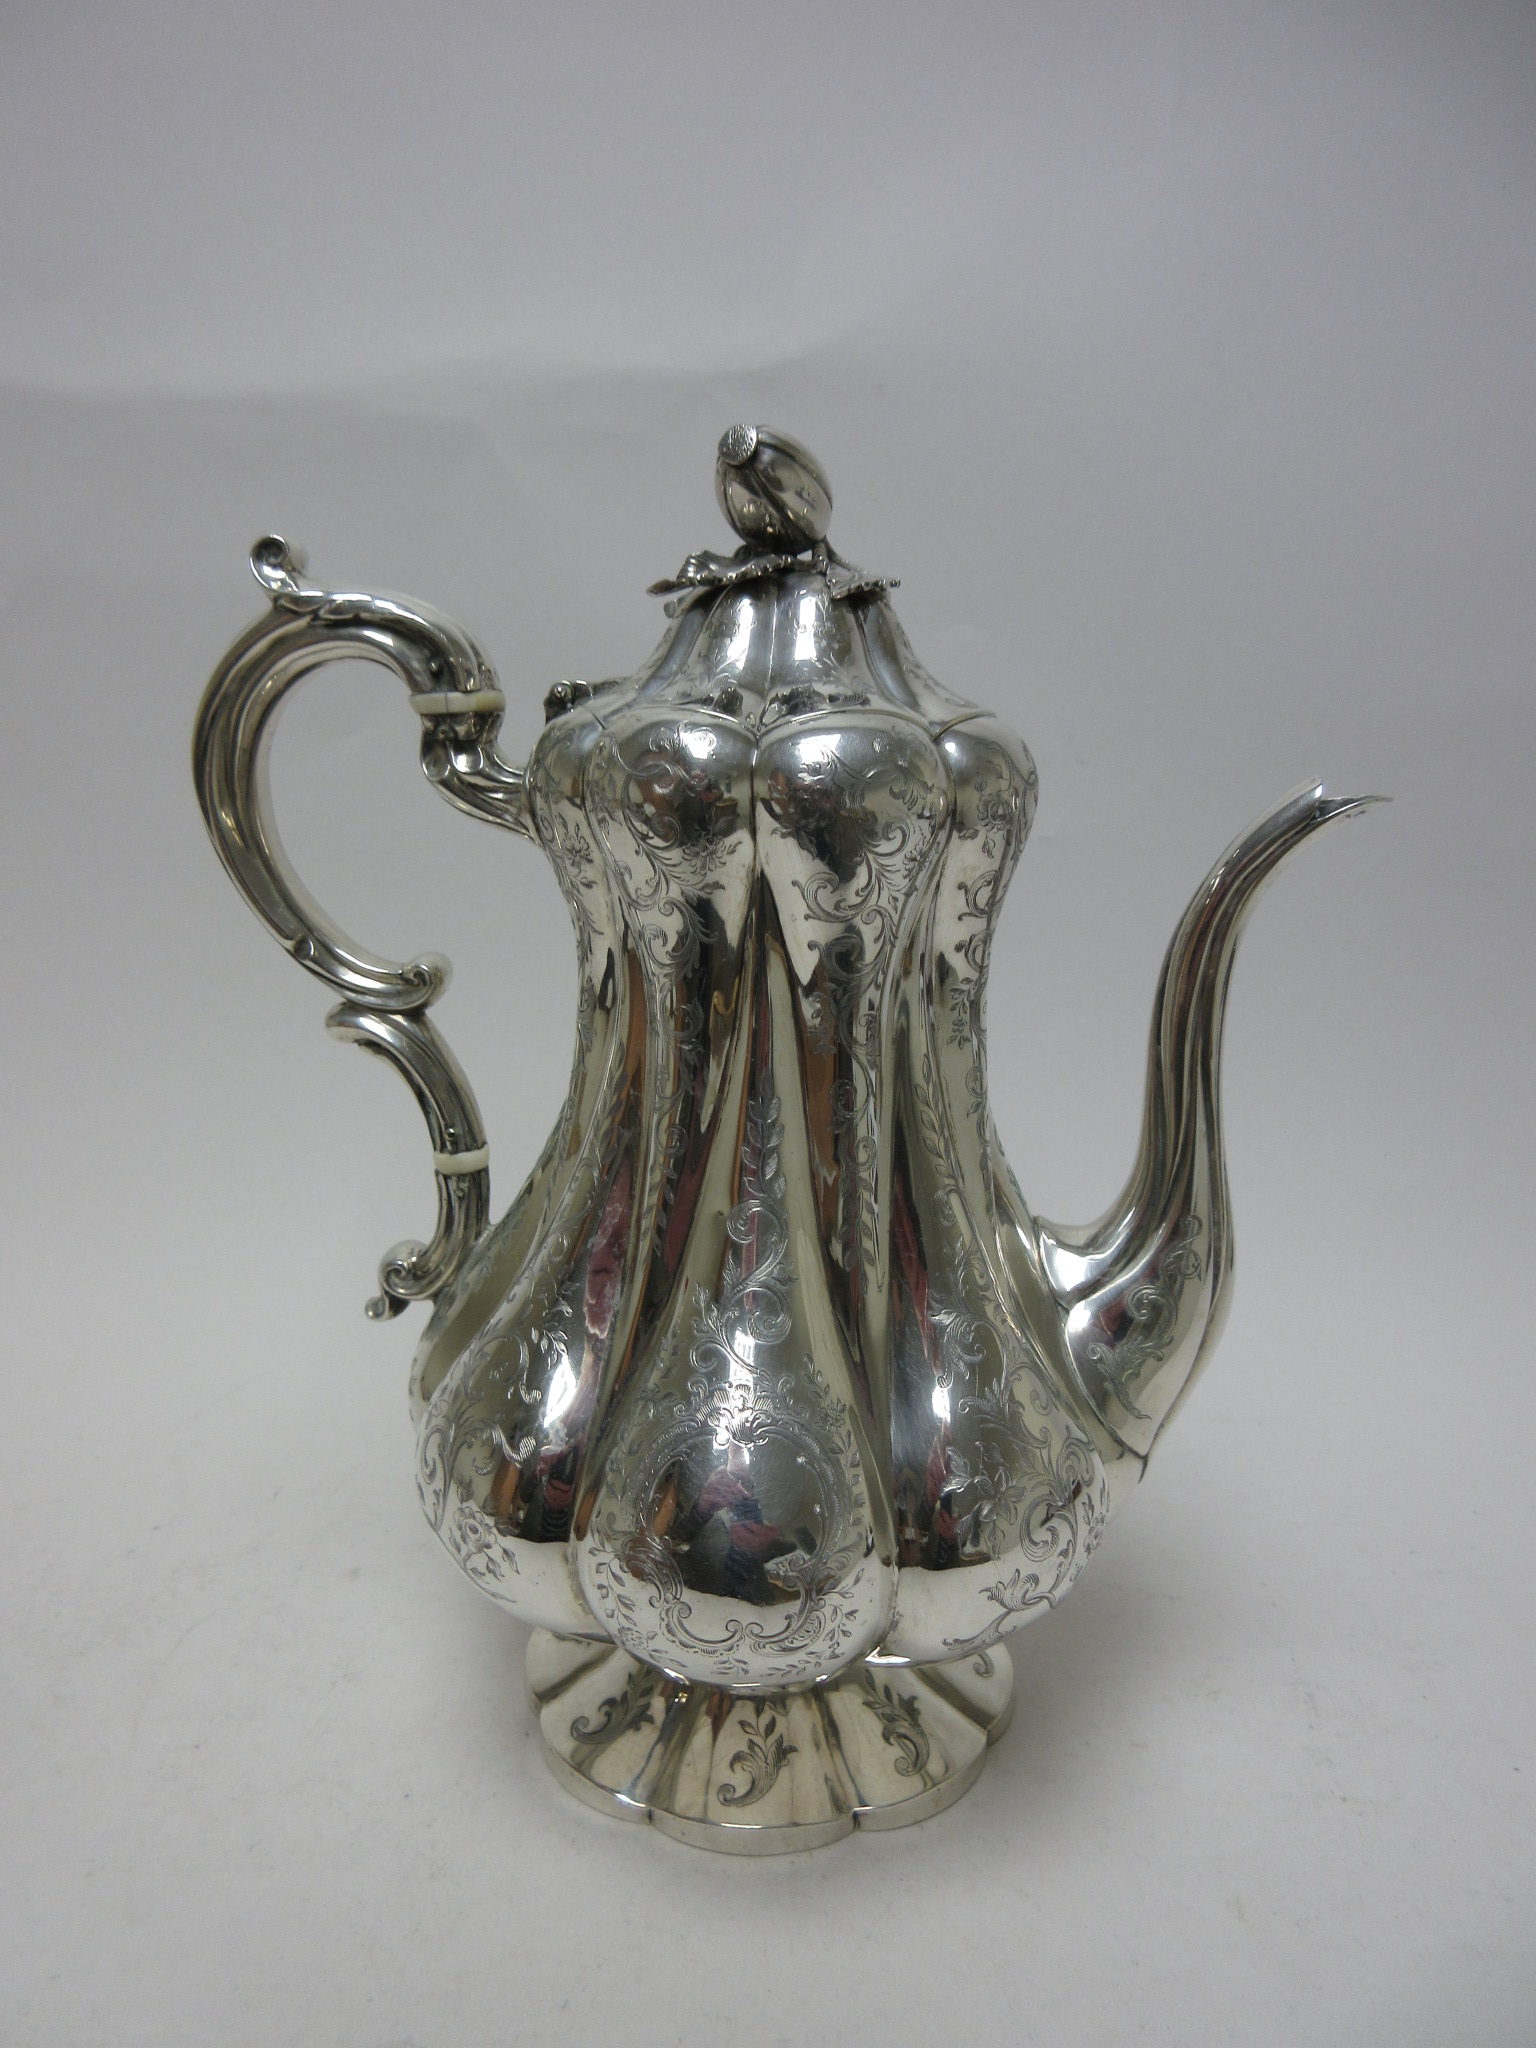 A Victorian silver Coffee Pot of pear shape with leafage scroll engraving, melon finial, London